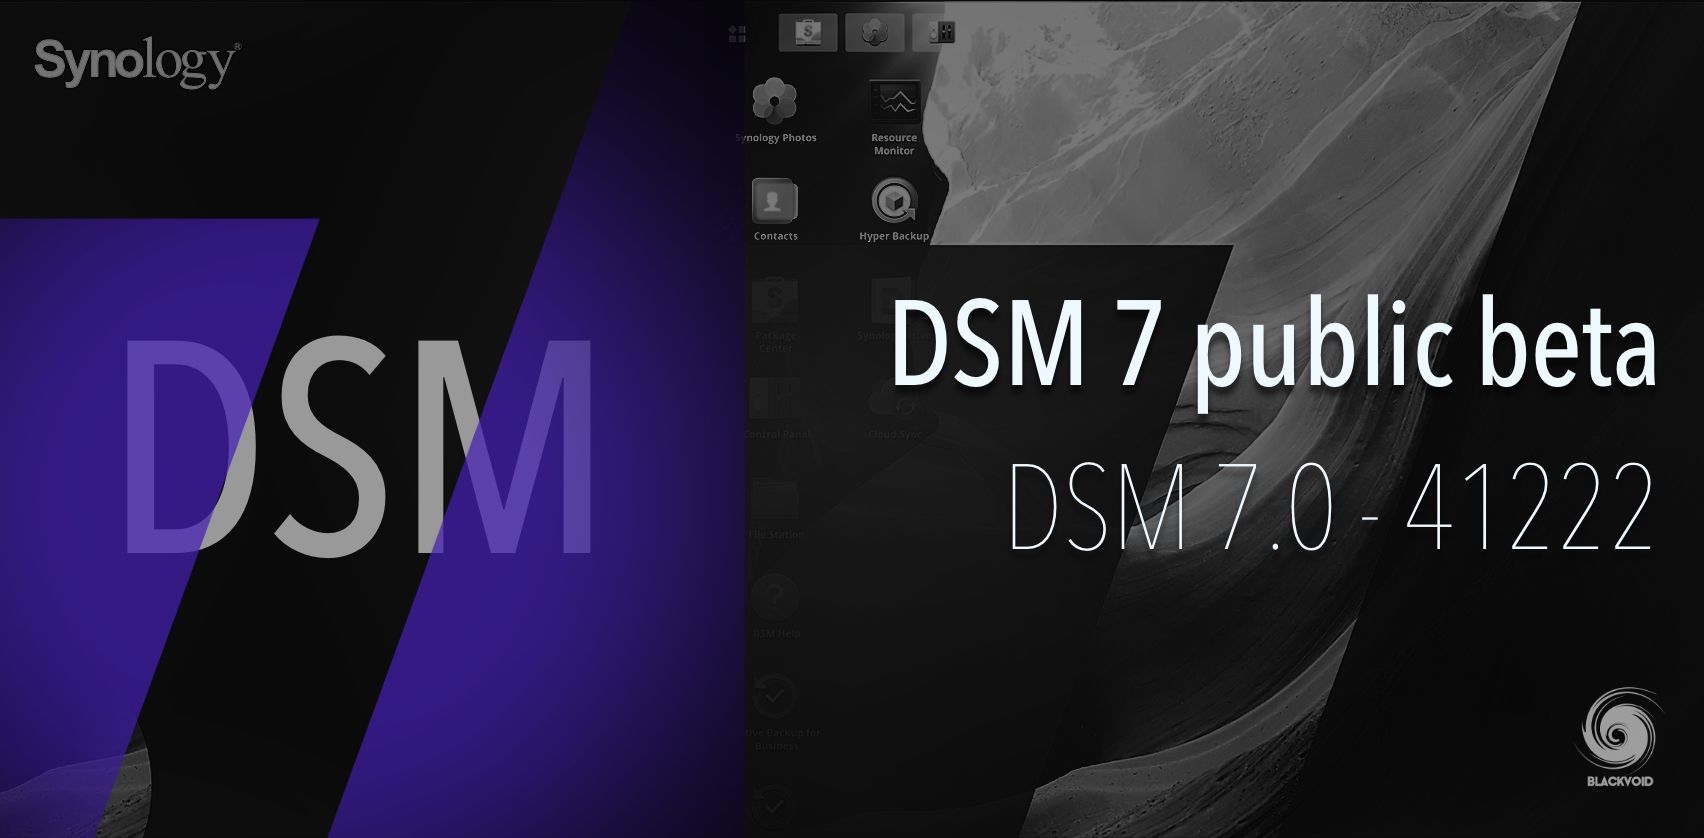 DSM 7 - 41222 public beta upgrade and new features